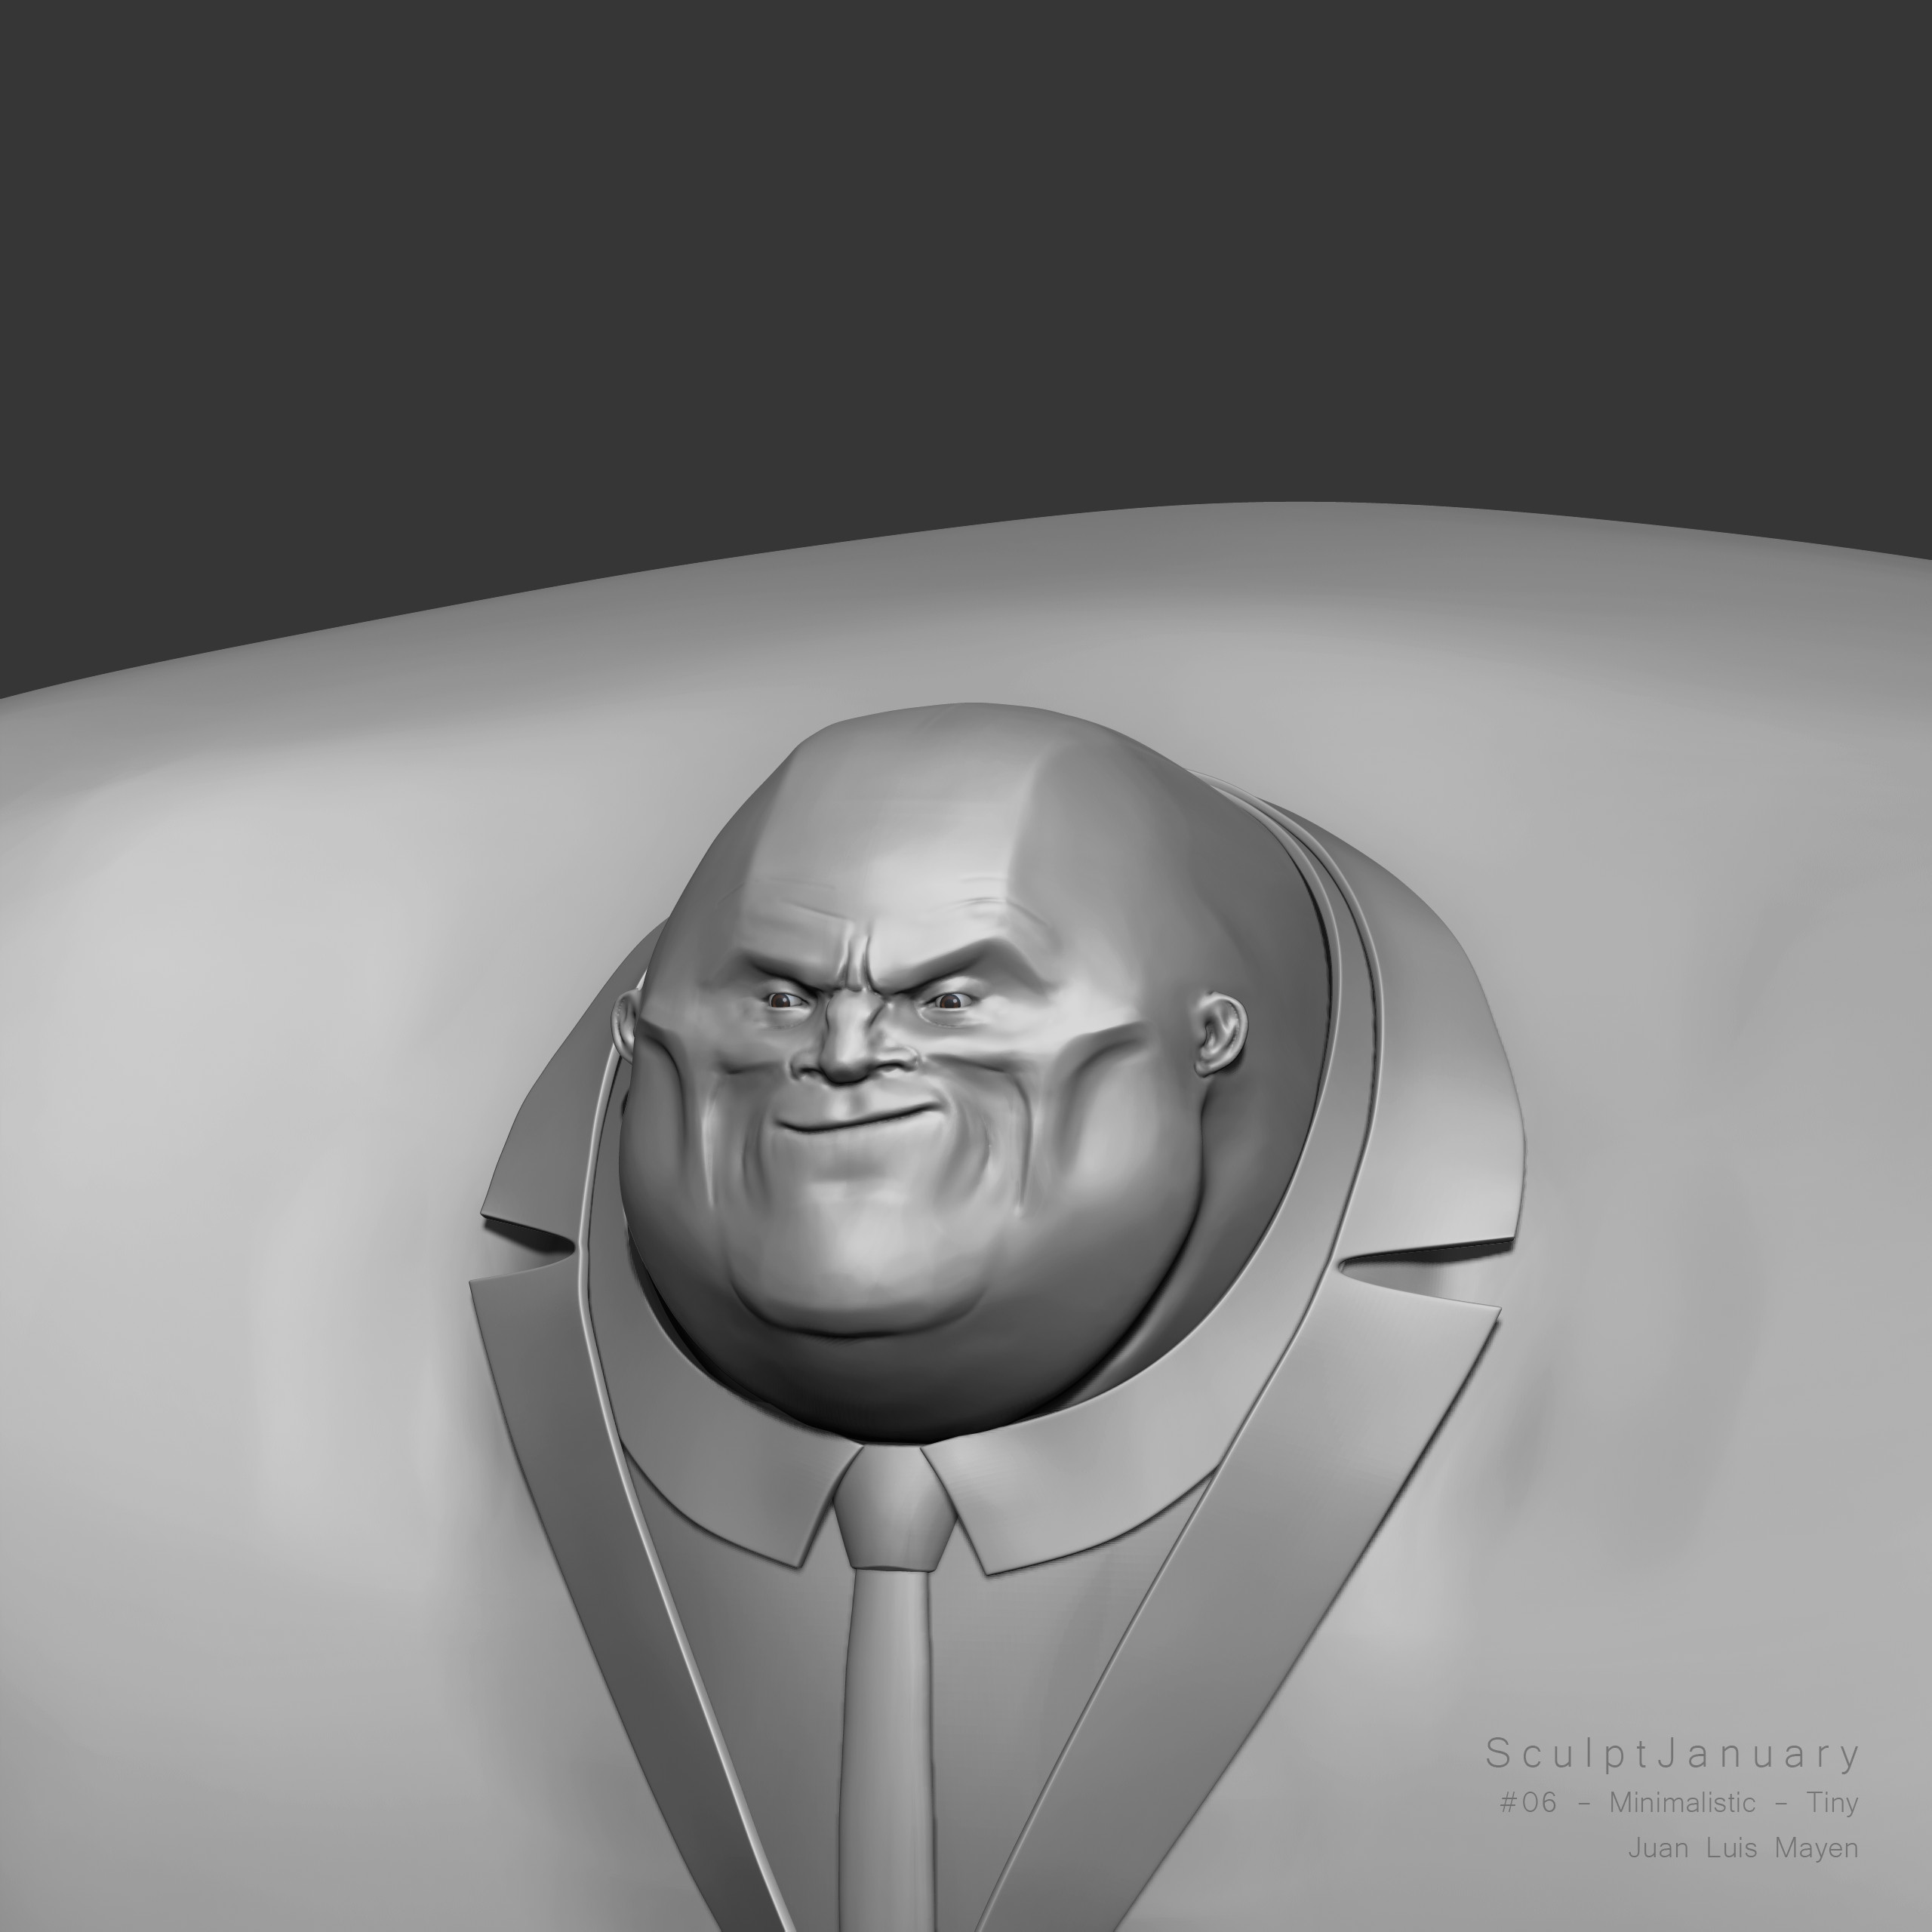 06 - Minimalistic - Tiny
(Fanart of Kingpin from Spiderman: Into the Spiderverse, Zbrush screenshot)